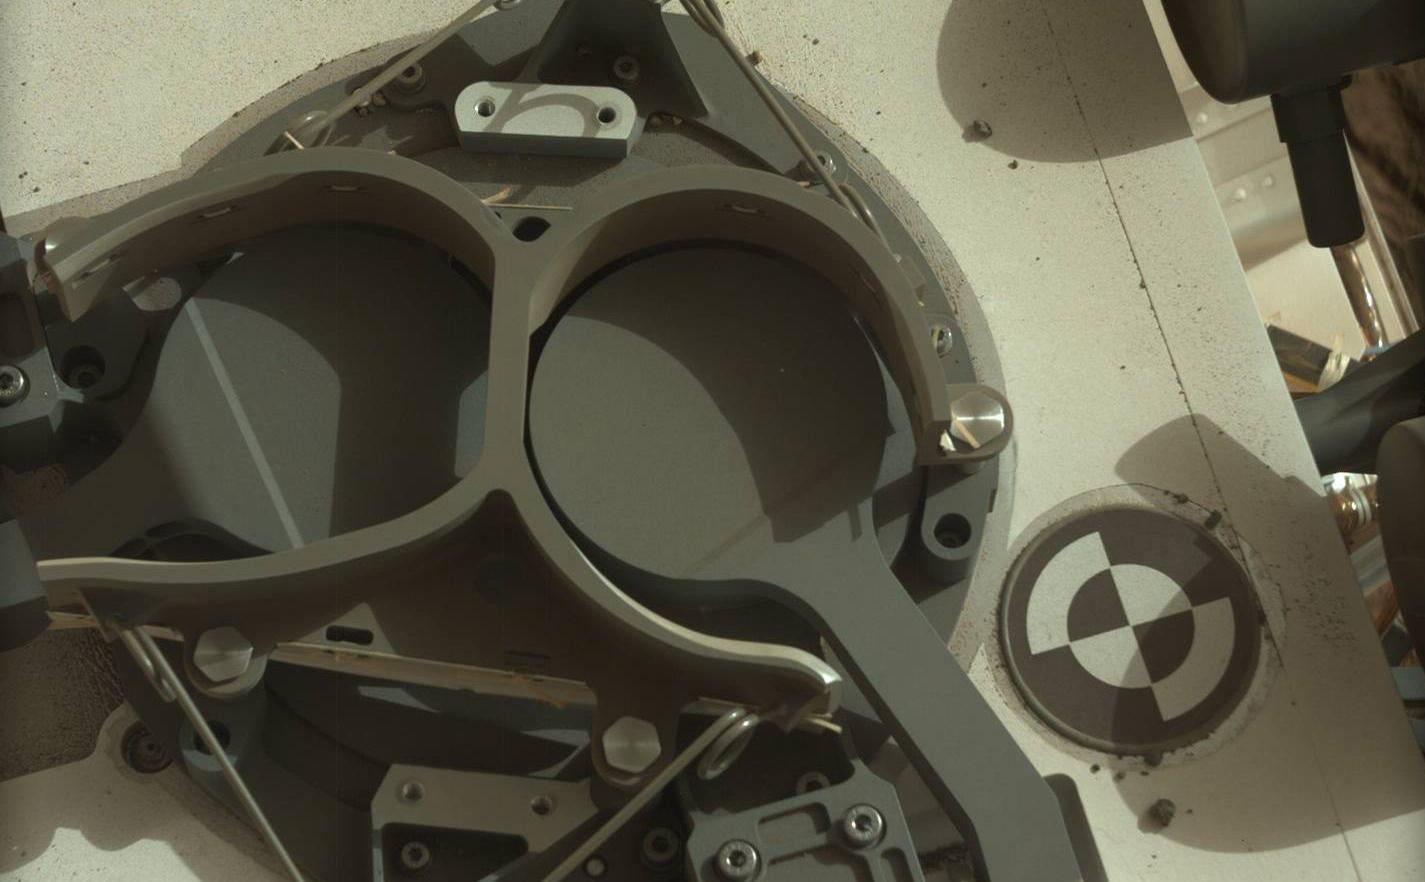 This subframe image from the left Mast Camera (Mastcam) on NASA's Mars rover Curiosity shows the covers in place over two sample inlet funnels of the rover's Sample Analysis at Mars (SAM) instrument suite.